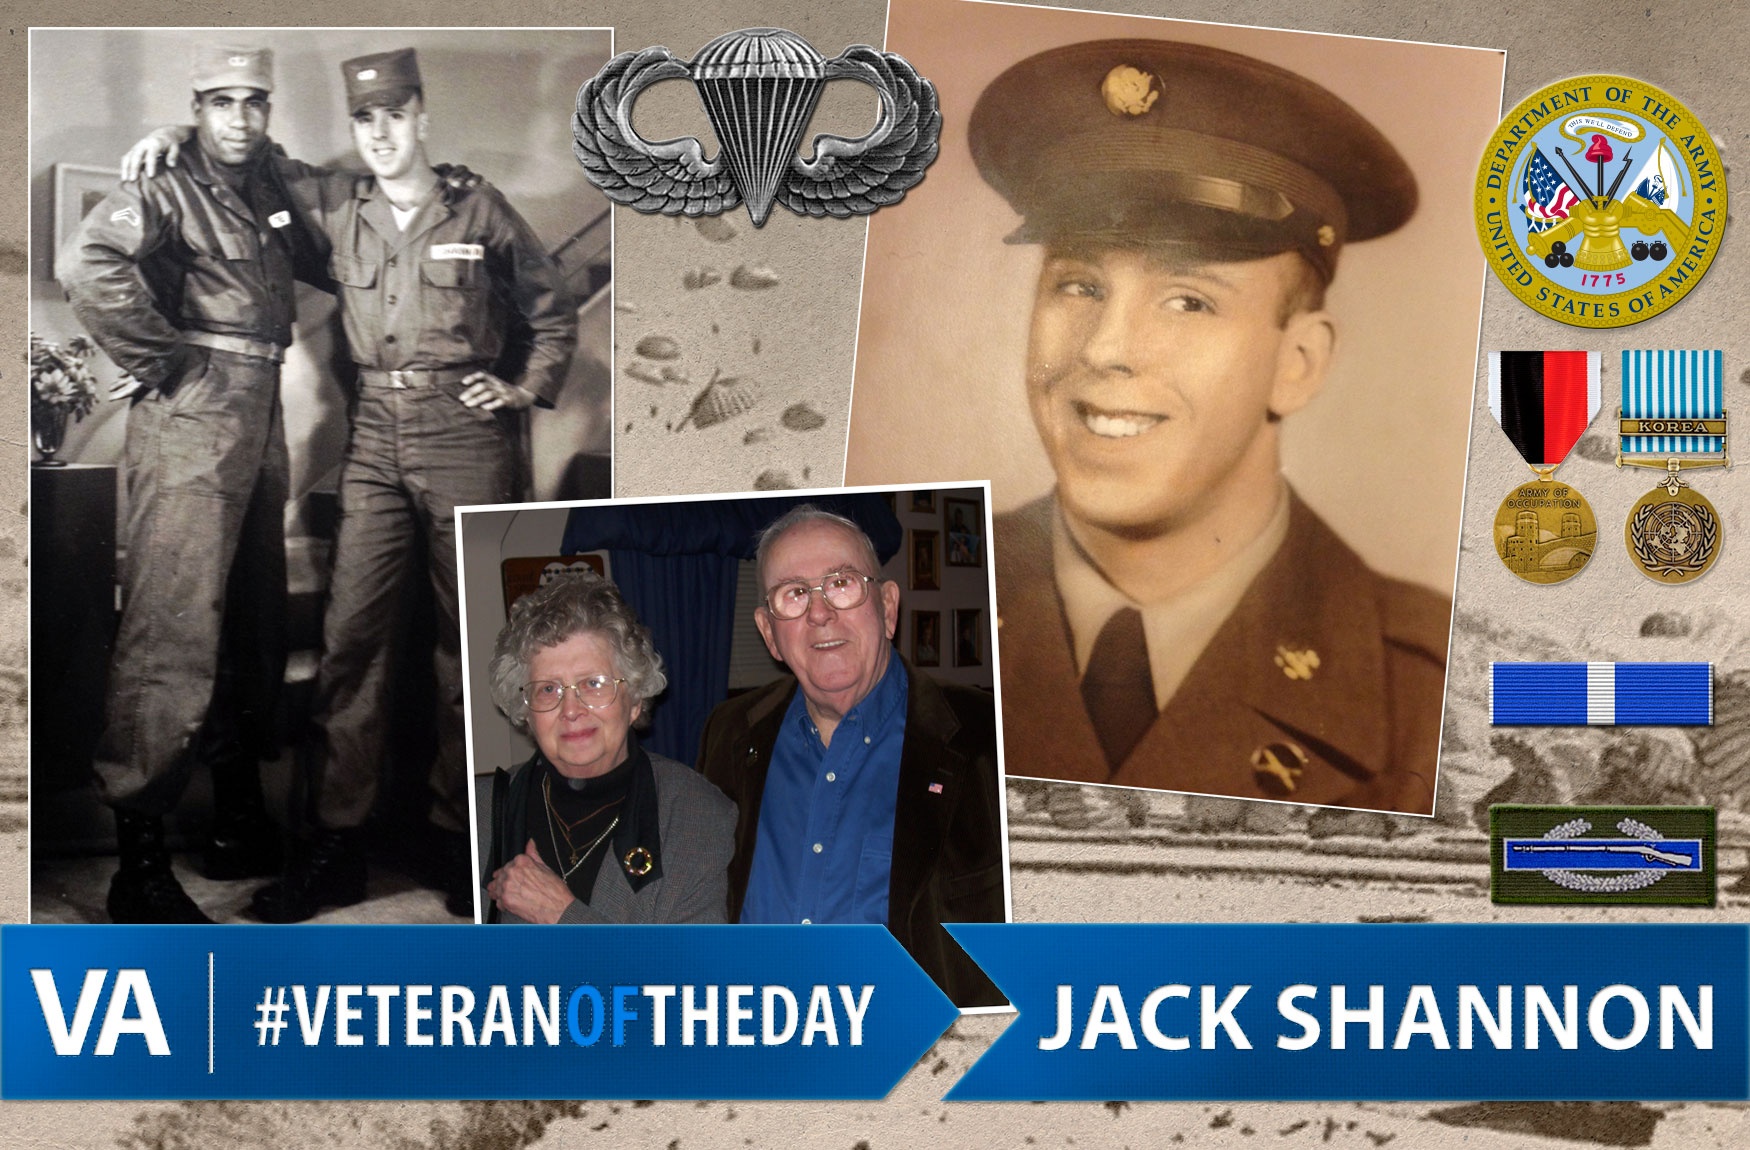 Jack Shannon - Veteran of the Day